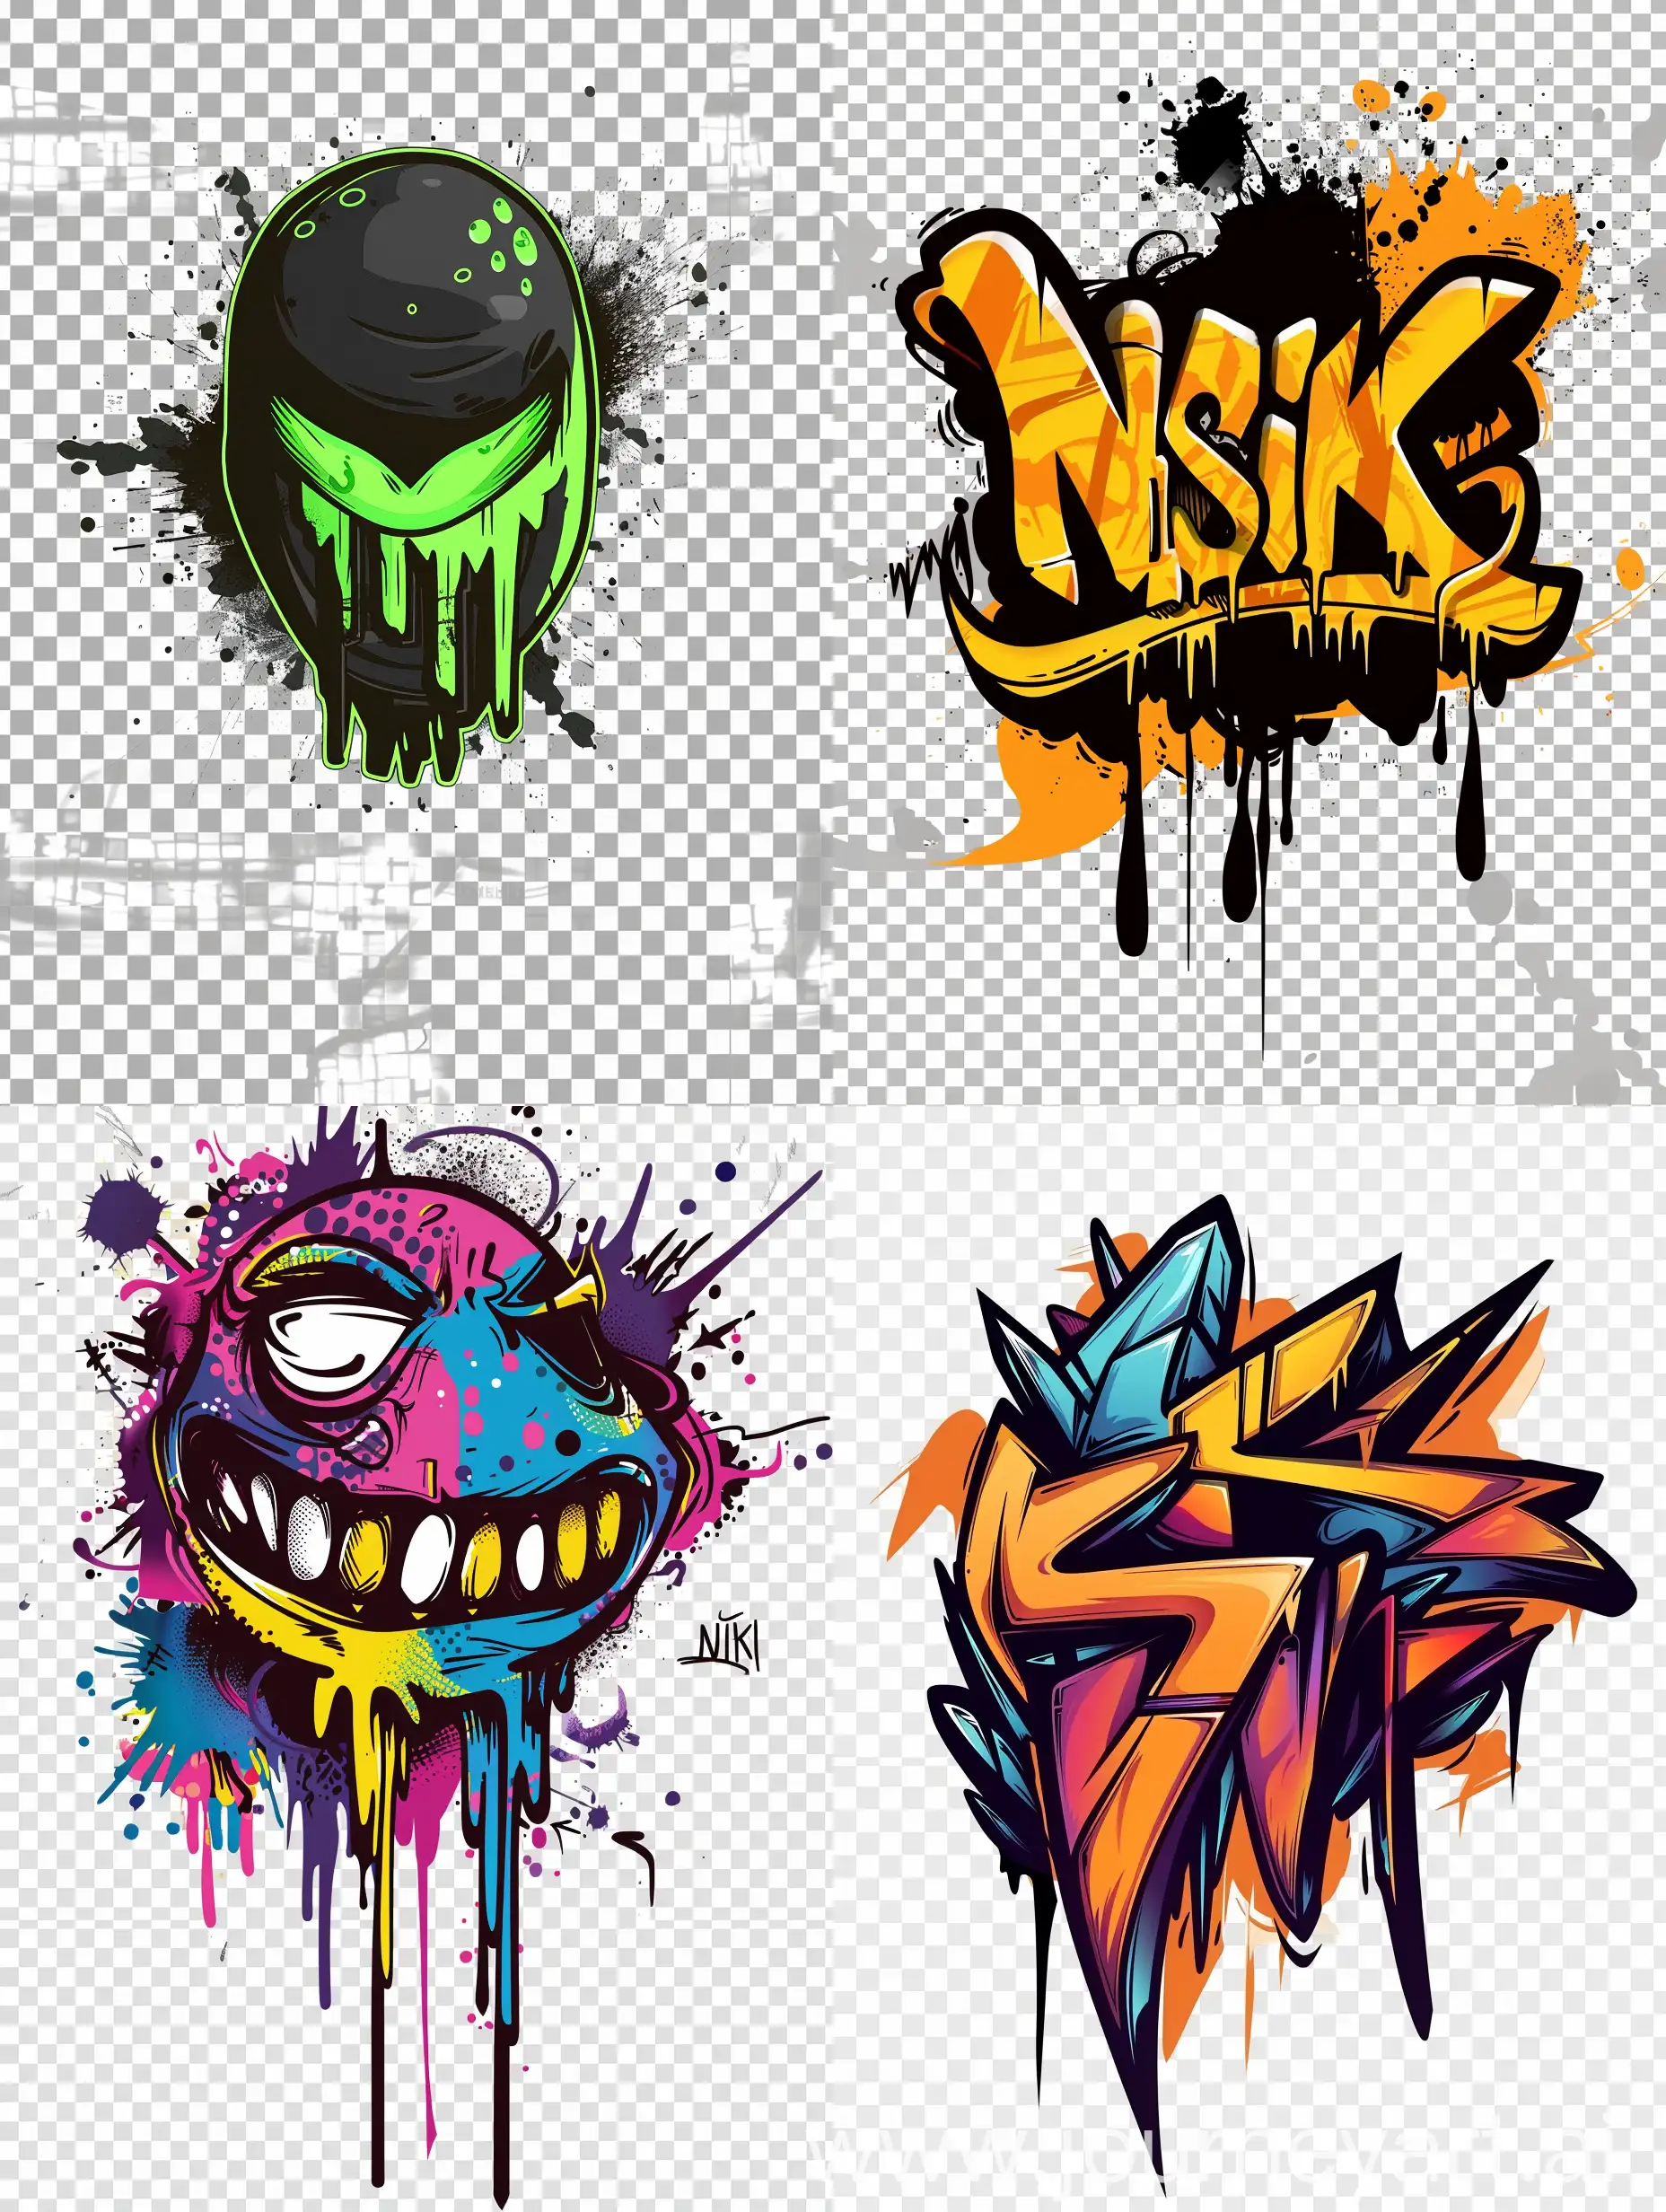 a simple graffiti NIMASKI CHALLENGE to be used as a favicon on a transparent background